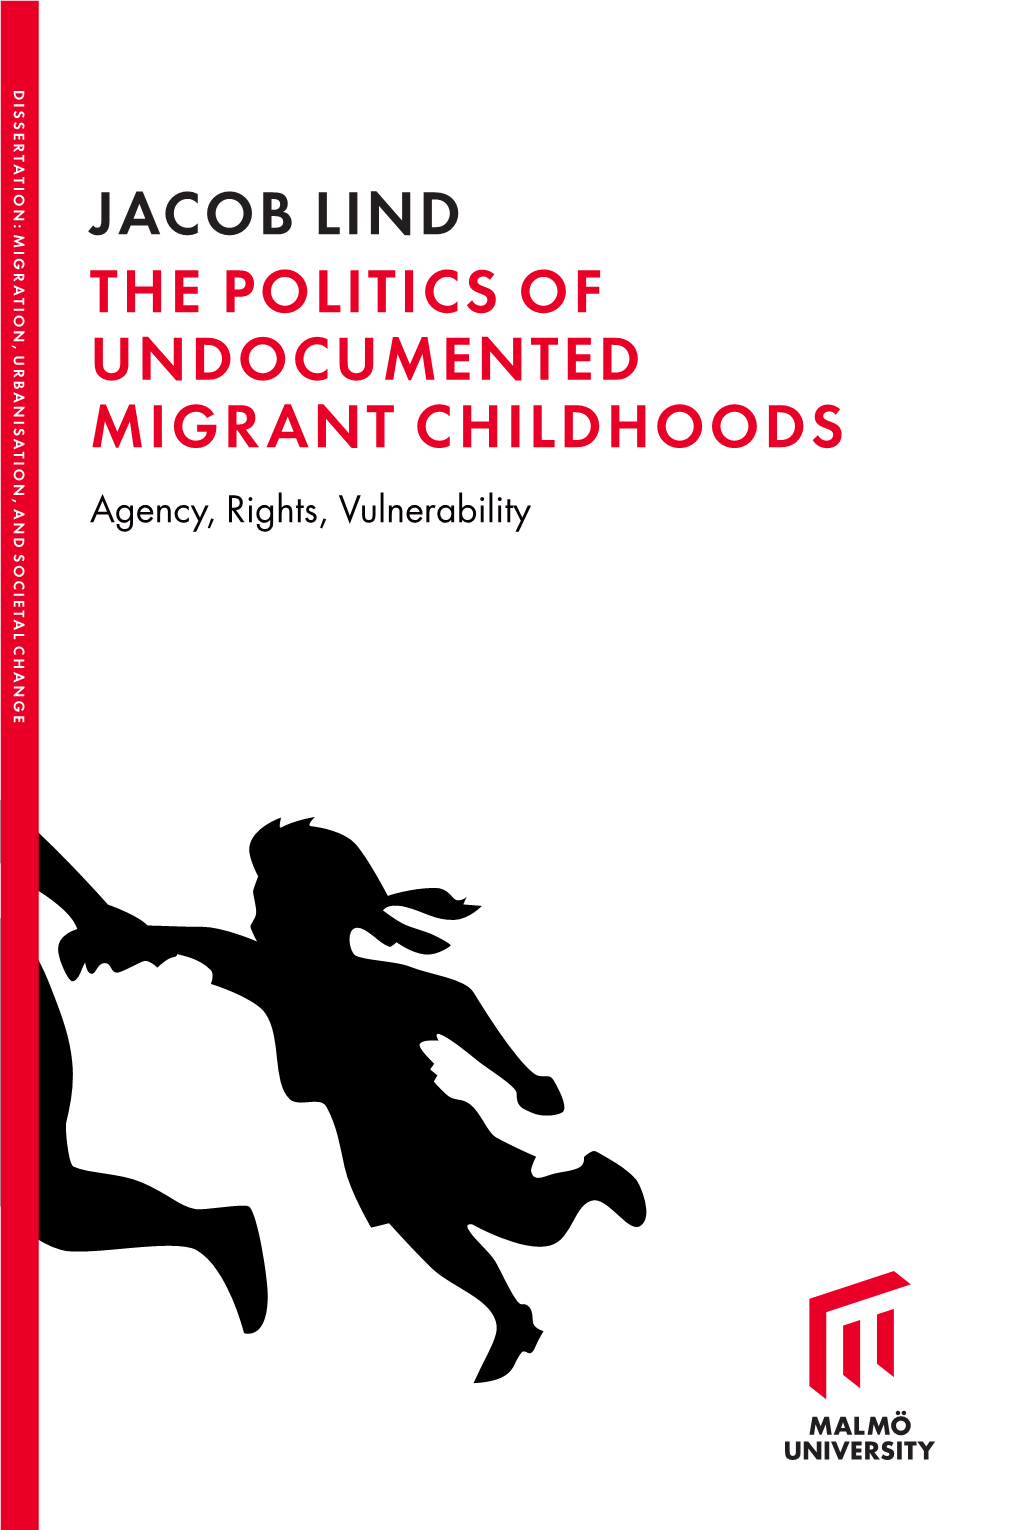 JACOB LIND the POLITICS of UNDOCUMENTED MIGRANT CHILDHOODS Agency, Rights, Vulnerability